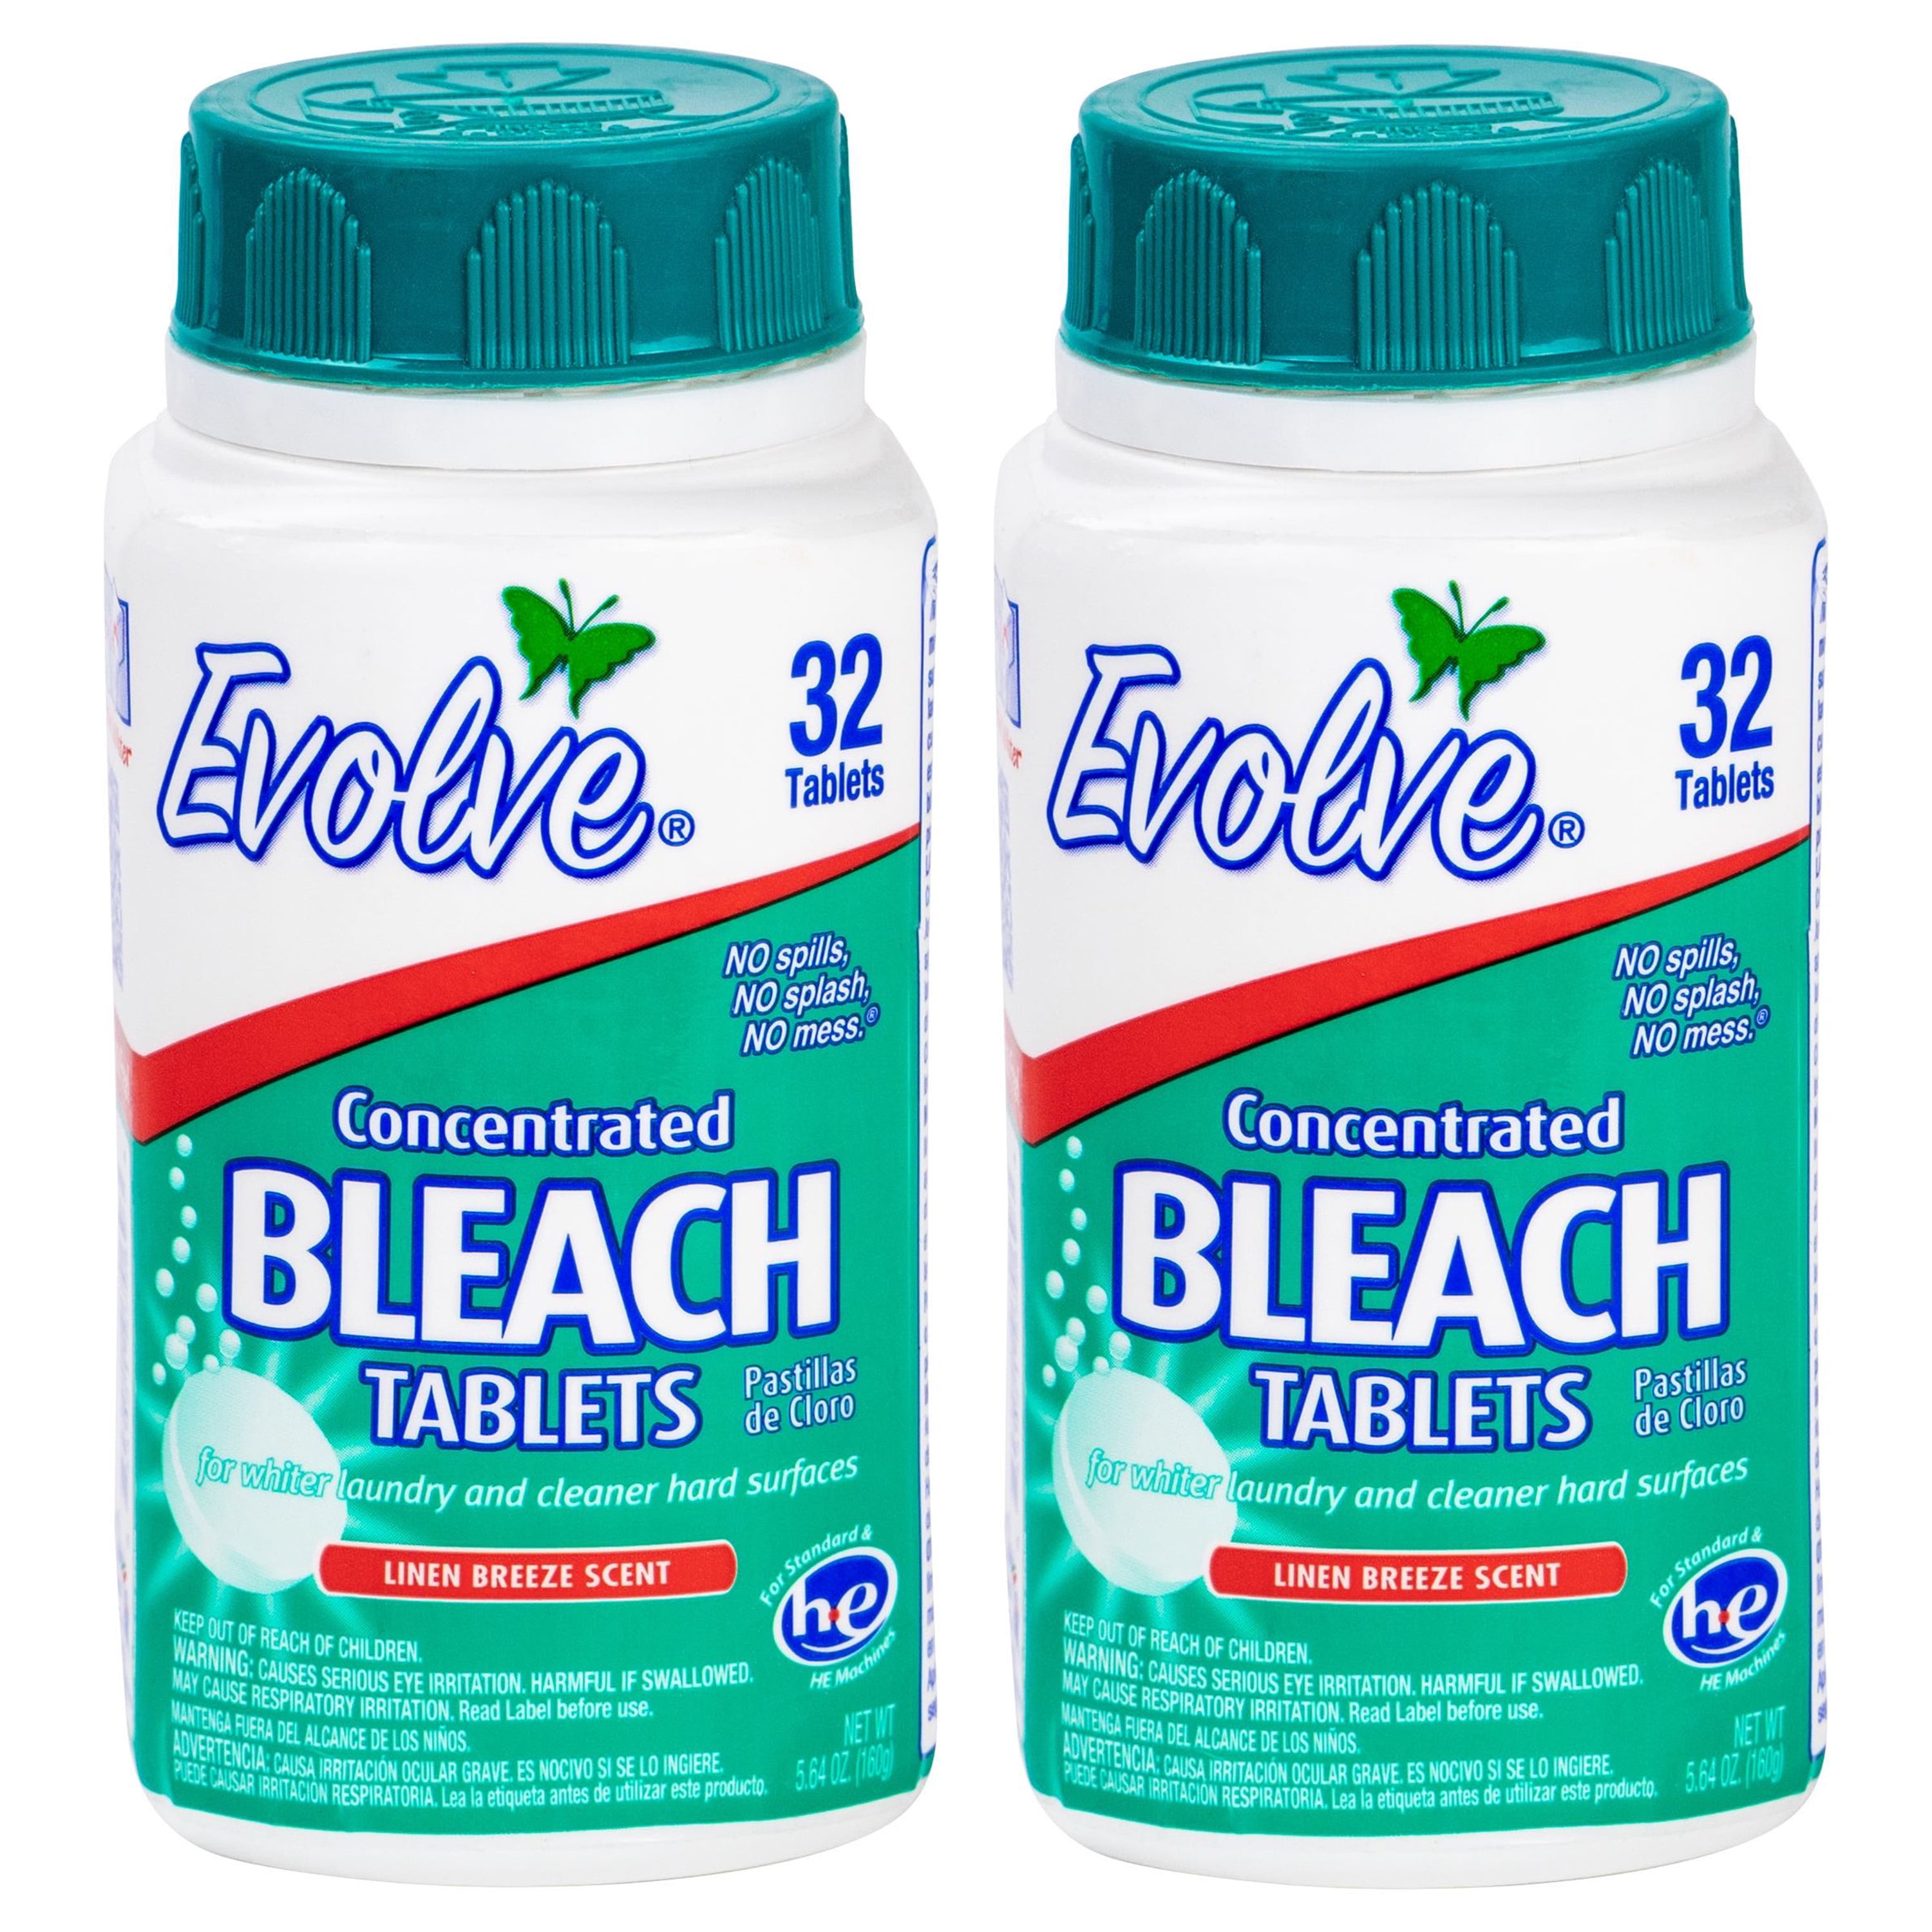 Evolve Ultra Concentrated Bleach Tablets, Linen Breeze Scent, 64 Total Count (32 count x 2 pack)